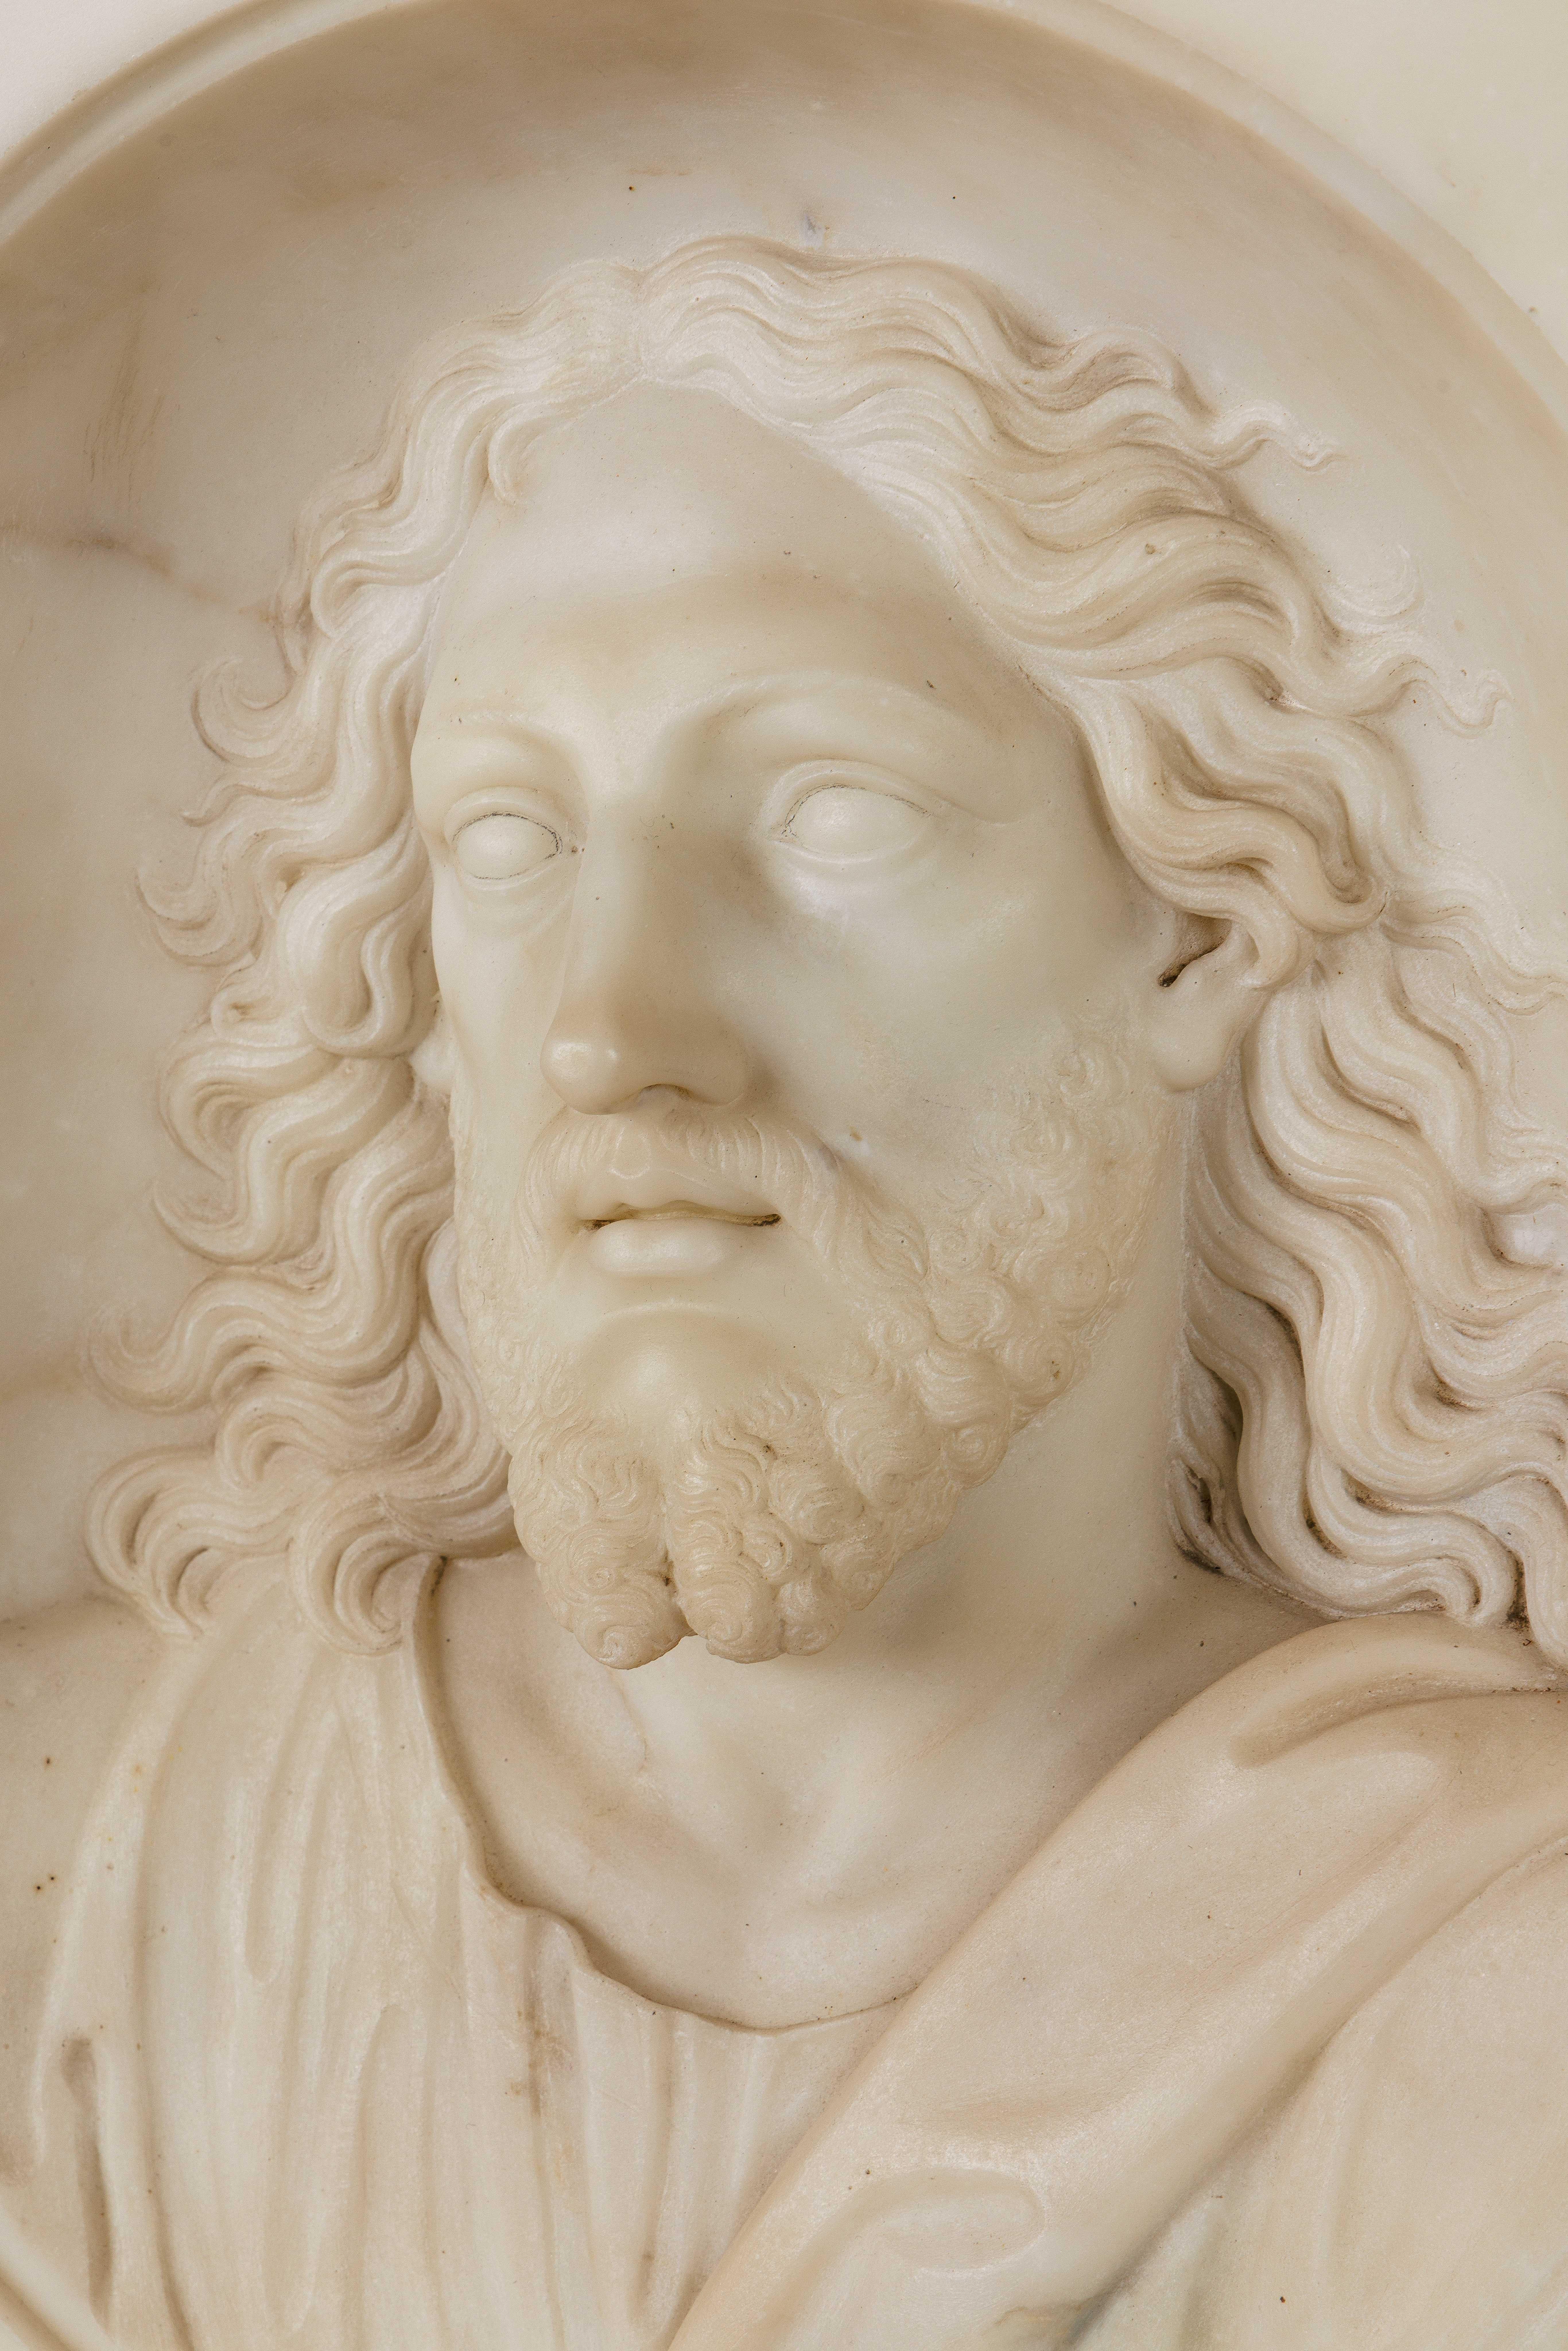 Rare and Important Italian White Marble Bust Sculpture of Jesus Christ, C. 1850 For Sale 5